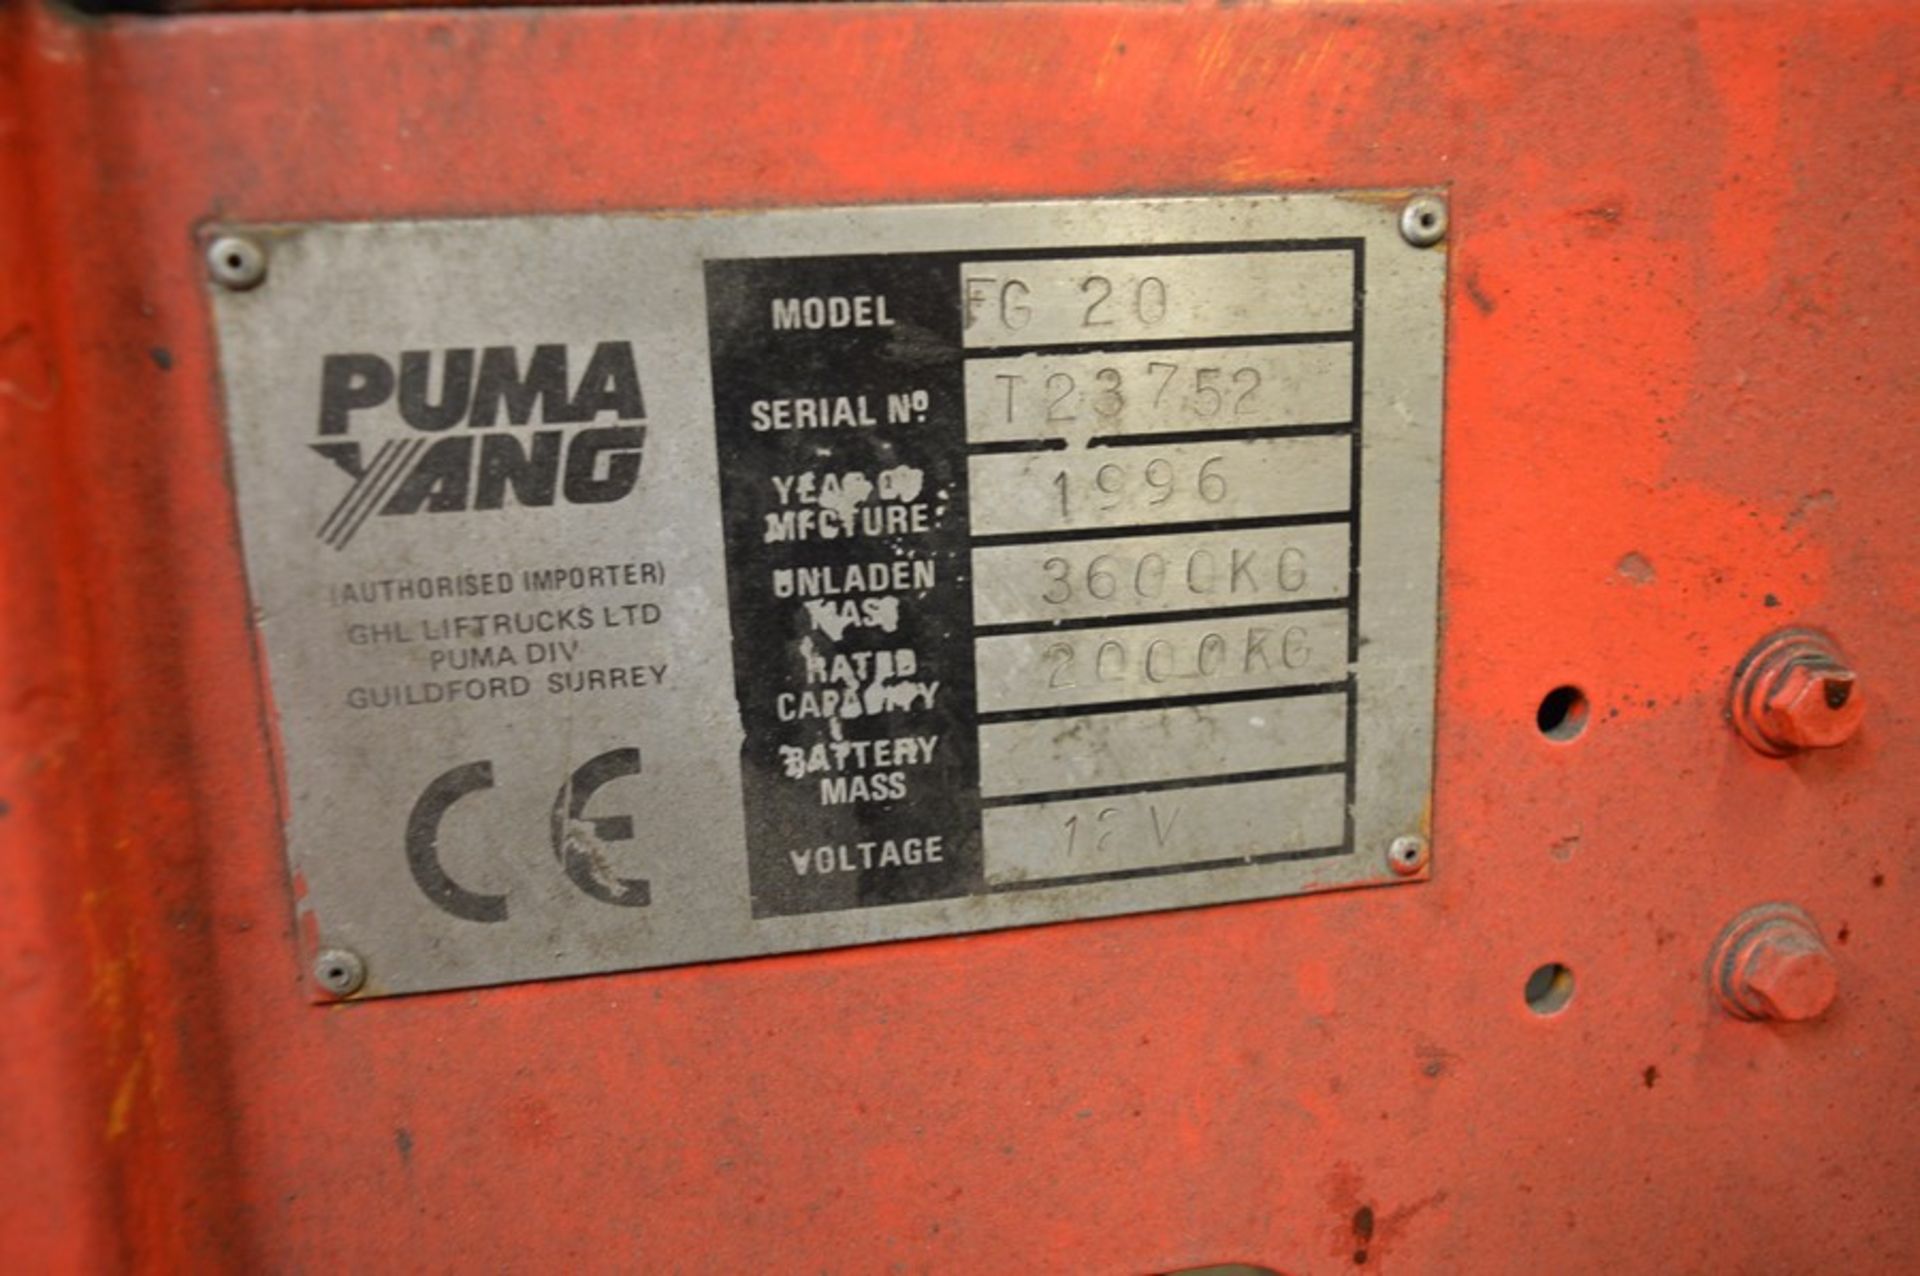 Puma, FG20 LPG counterbalance forklift truck, Serial No. T23752 (1996), Capacity: 3,600kg, Hours: - Image 8 of 8